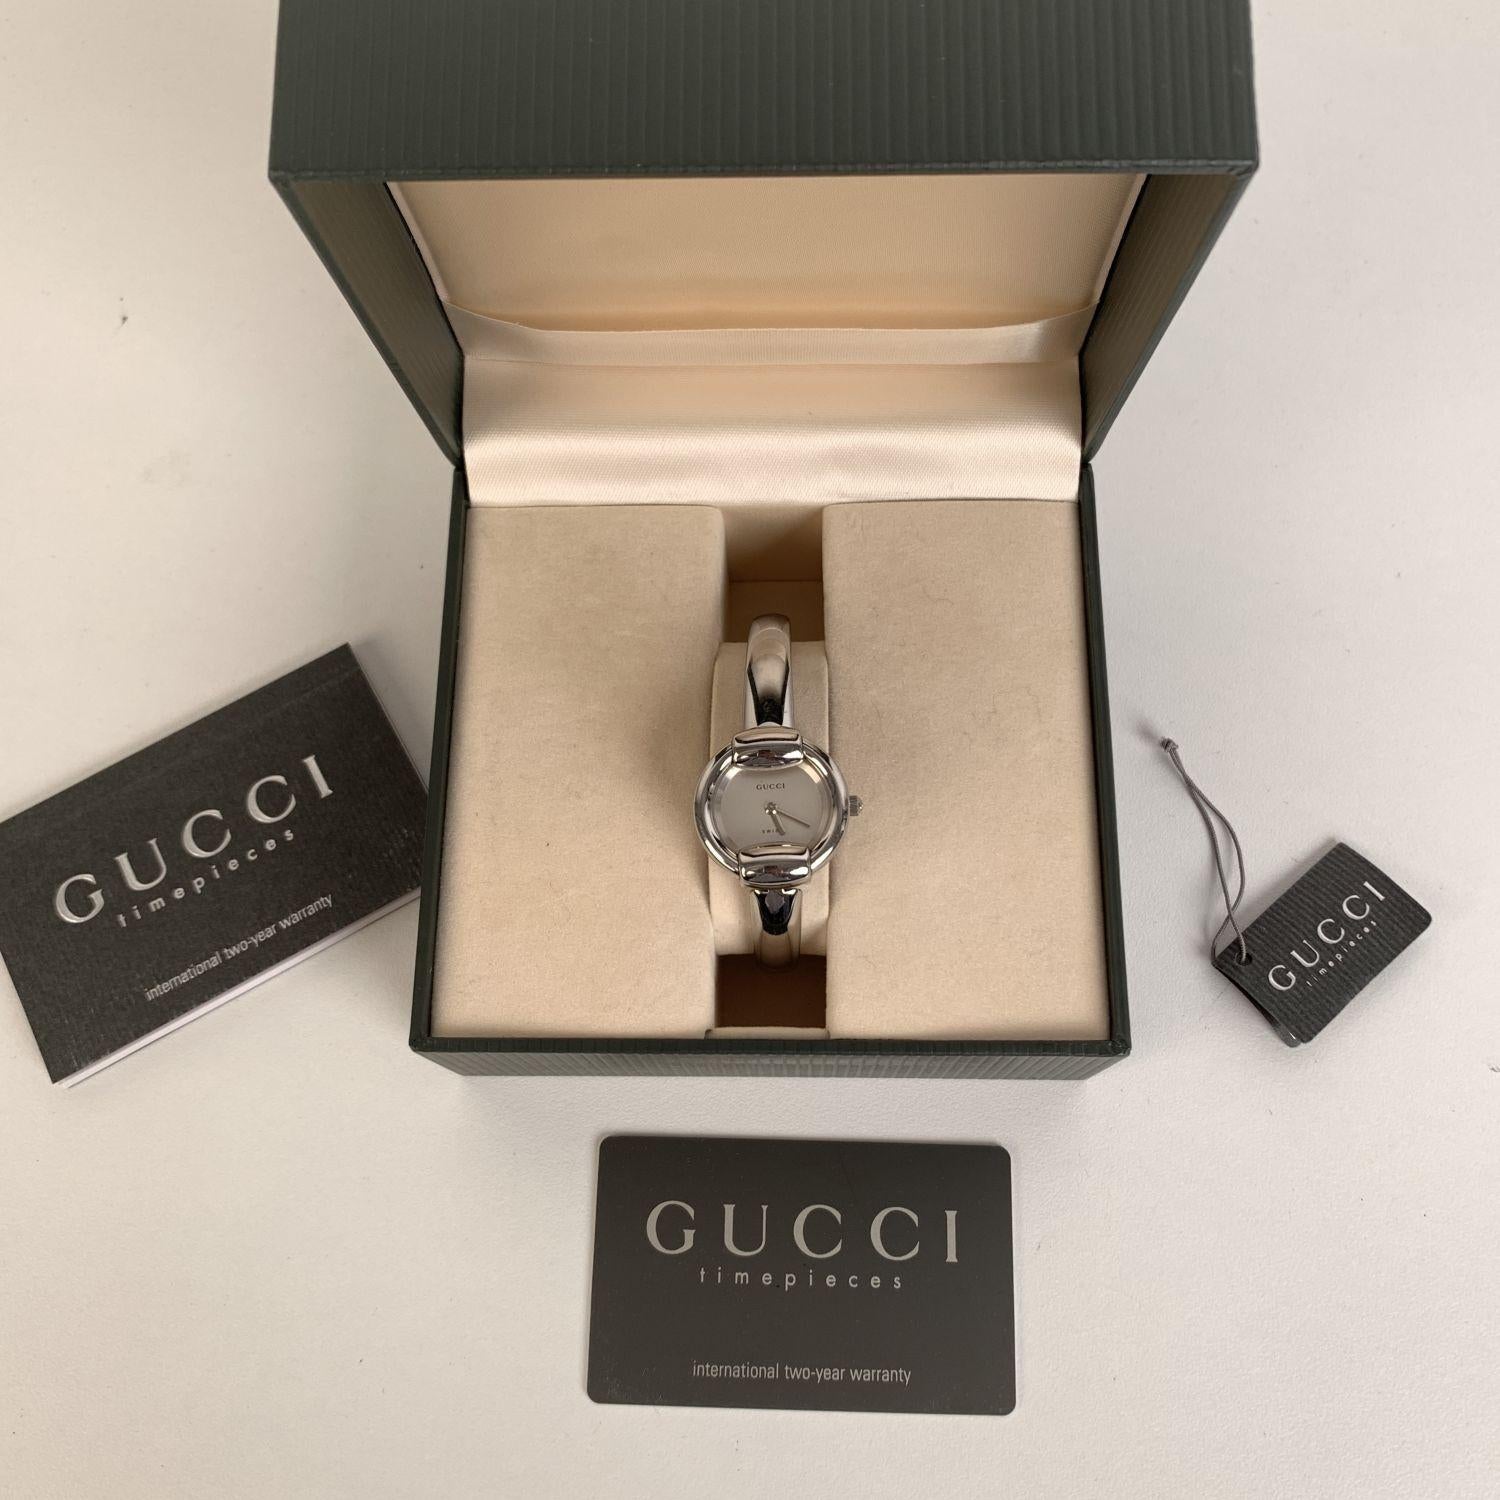 Gucci 1400 L stainless steel wrist watch from the 90s. Stainless steel case. White dial and Sapphire crystal. Swiss Made Quartz movement. Gucci written on face. Water Resistant to 3atm. Clasp closure. Swiss Made. Will fit up to 6 inches - 15,2 cm